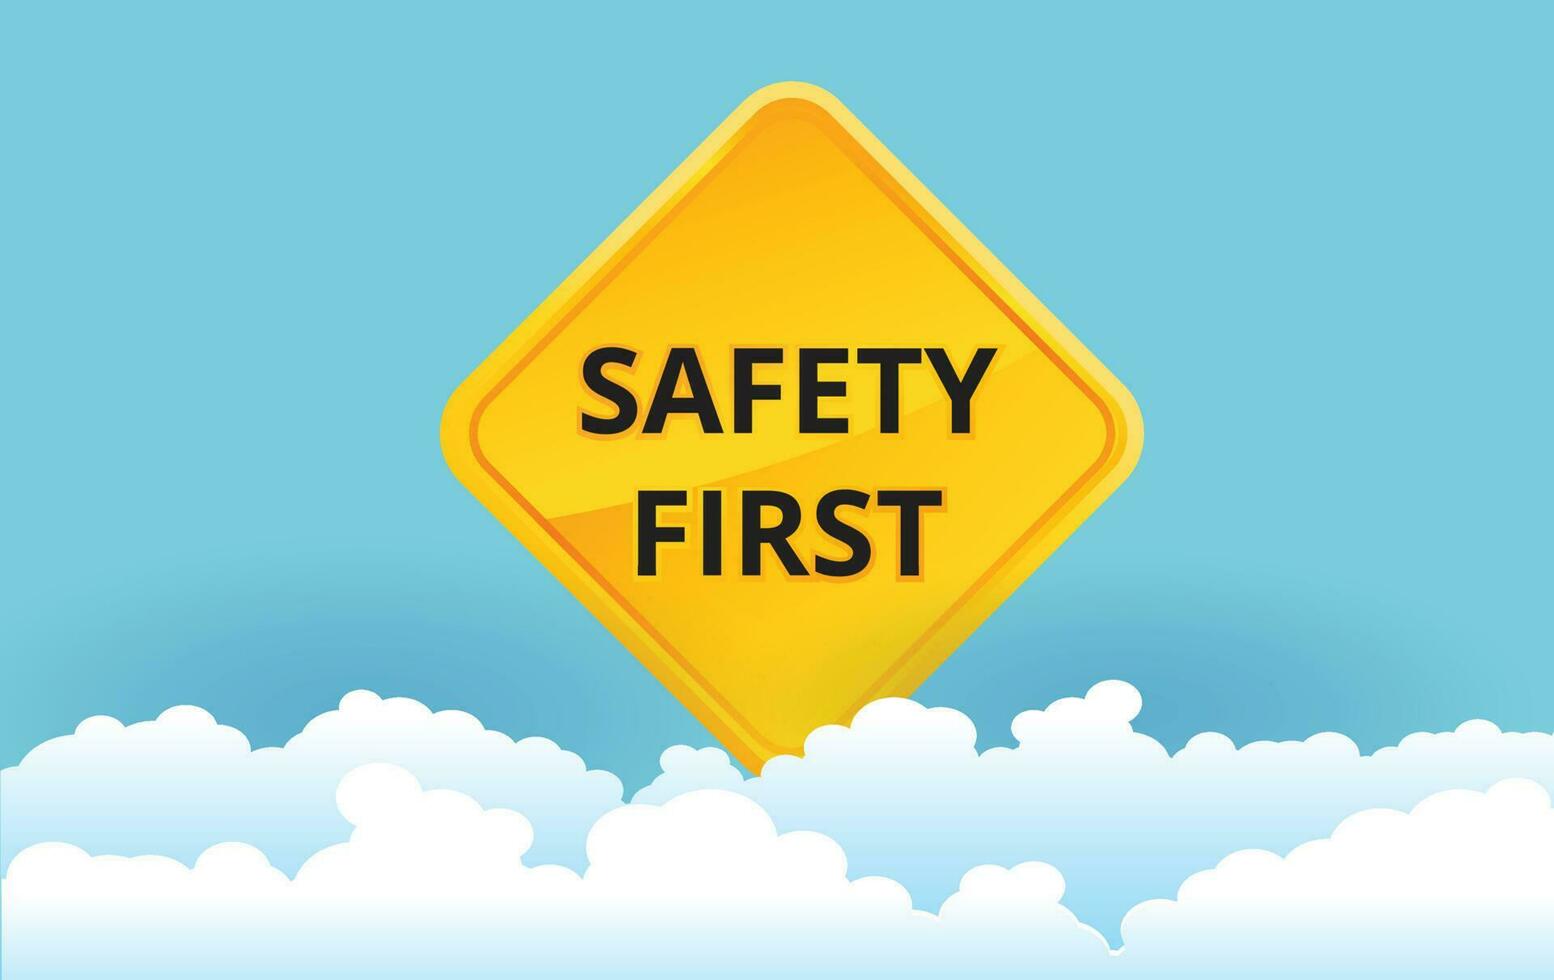 Safety first sign on background, construction concept, vector design